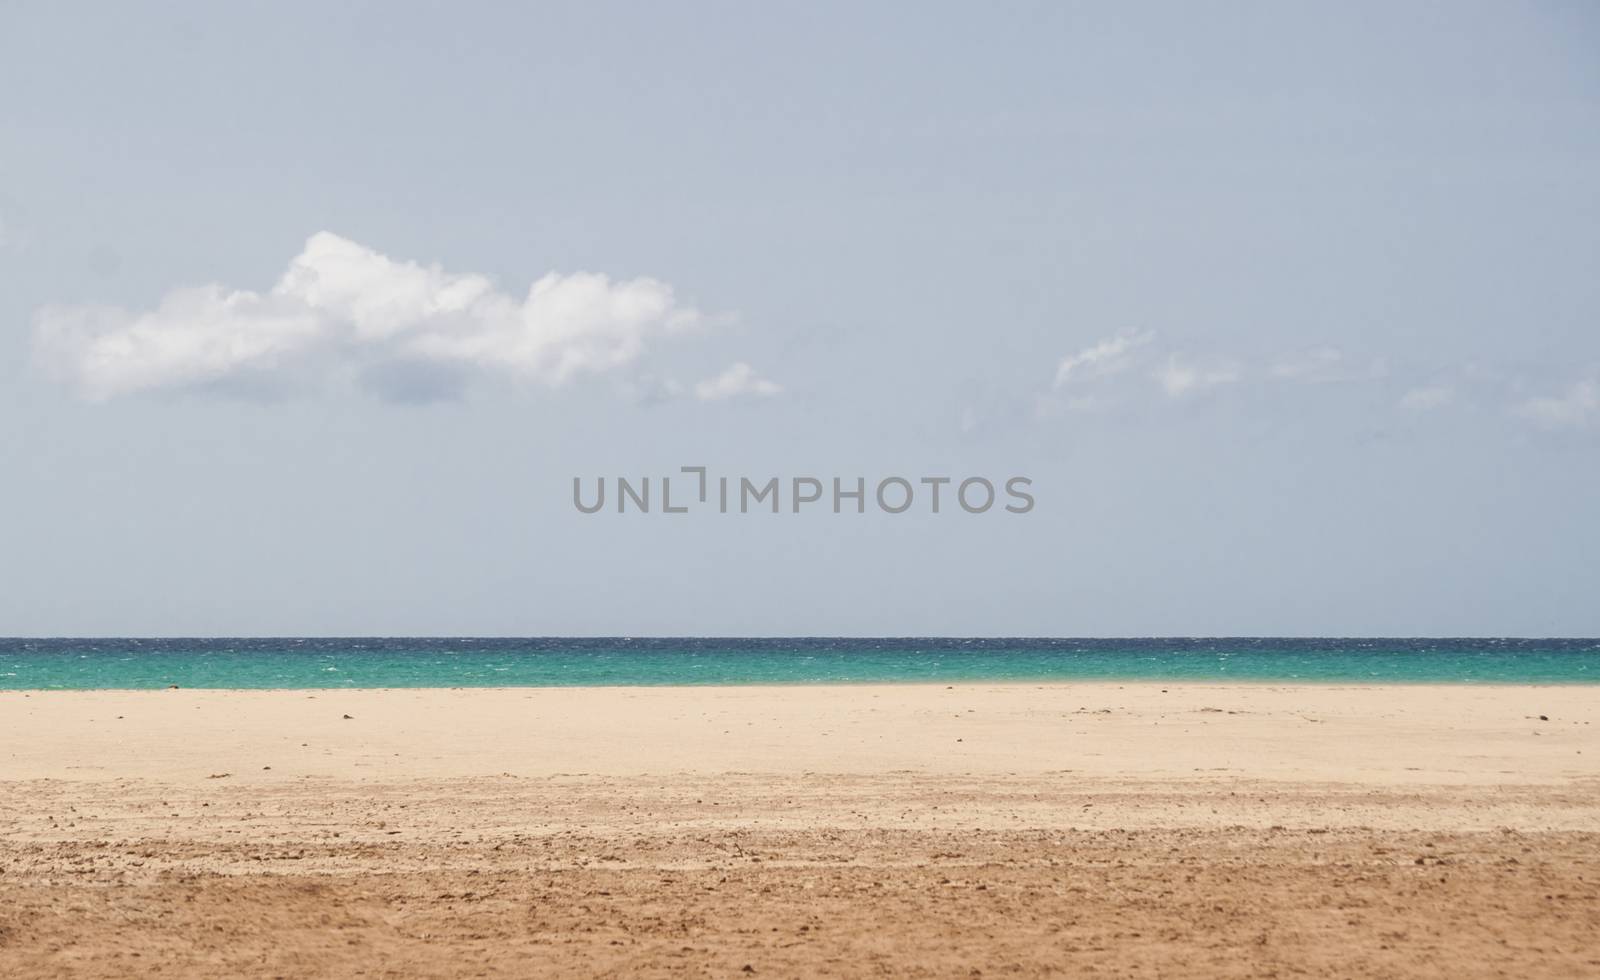 Open beach with blue water and sky. Many copy space available.